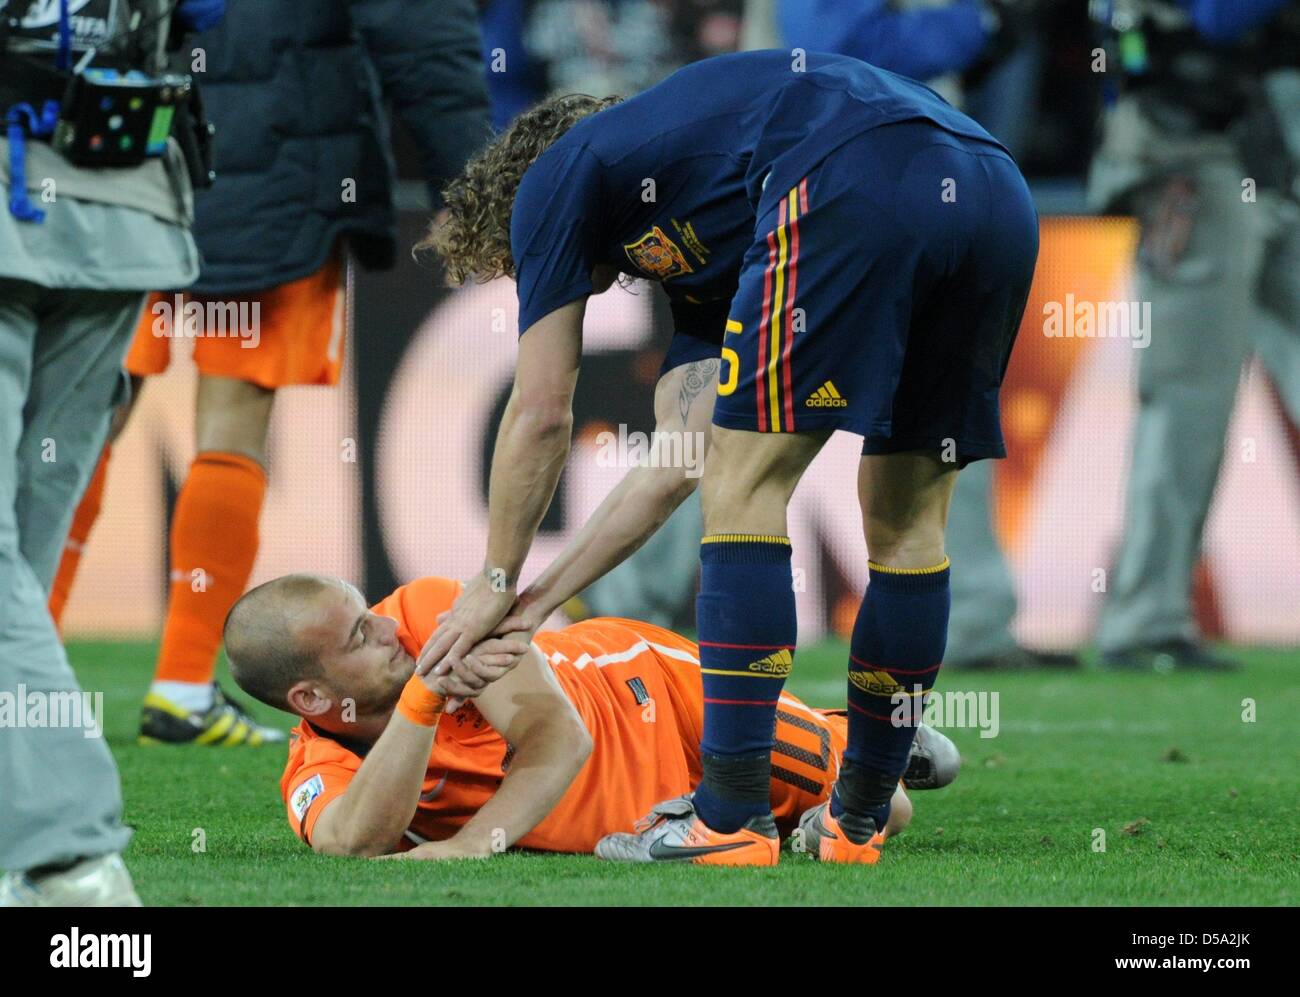 Dutch Wesley Sneijder is helped up by Spain's Carles Puyol after the 2010 FIFA World Cup final match between the Netherlands and Spain at Soccer City Stadium in Johannesburg, South Africa 11 July 2010. Photo: Marcus Brandt dpa - Please refer to http://dpaq.de/FIFA-WM2010-TC  +++(c) dpa - Bildfunk+++ Stock Photo